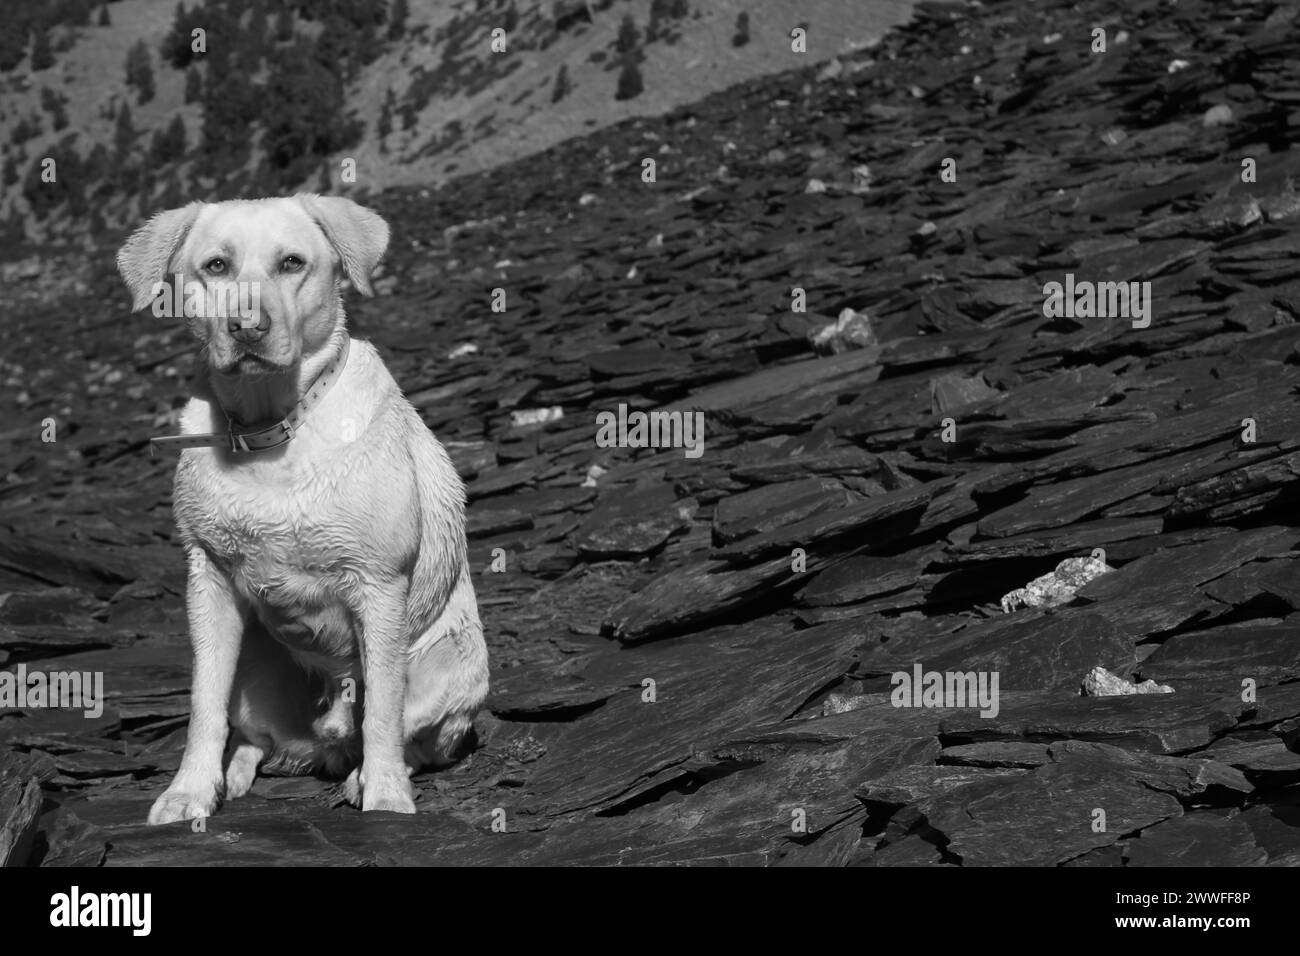 A black and white photo of a Labrador dog sitting on rocky terrain, Amazing Dogs in the Nature Stock Photo